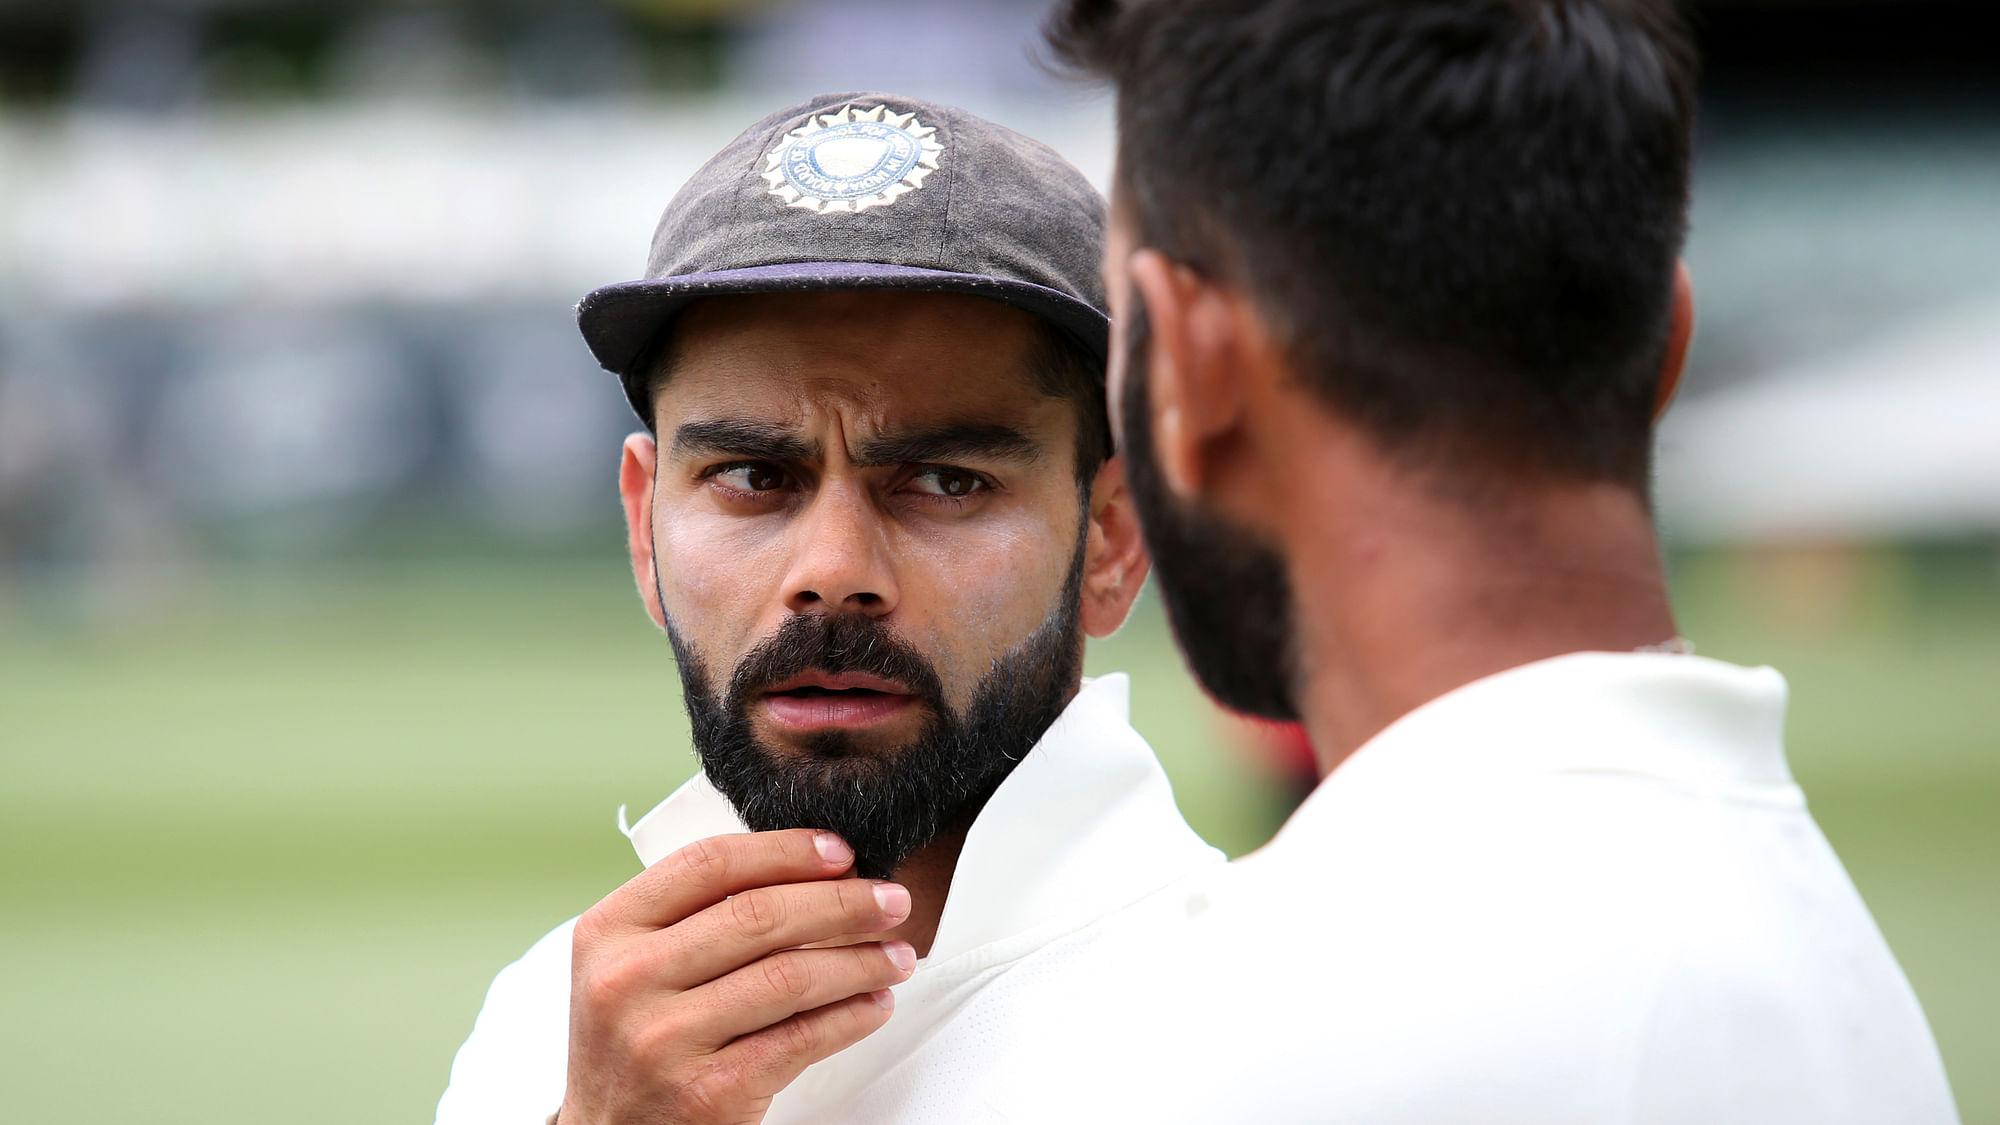 Allan Border has said Virat Kohli’s aggression most likely stems from his desire to cement his legacy with an away series victory.